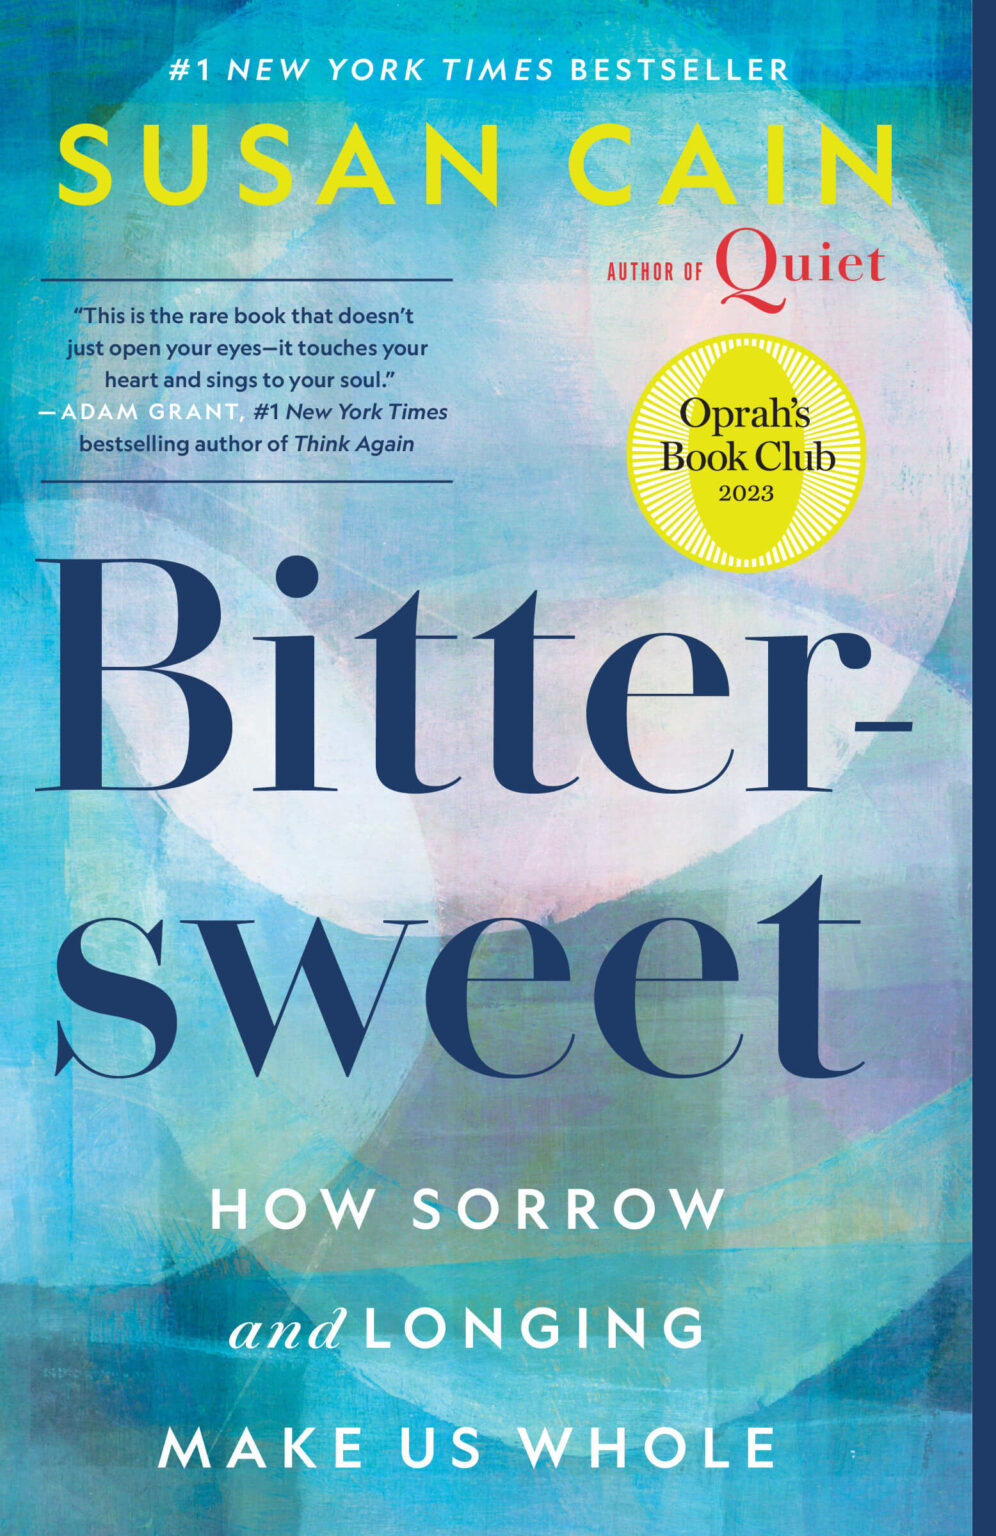 "Bittersweet" book cover